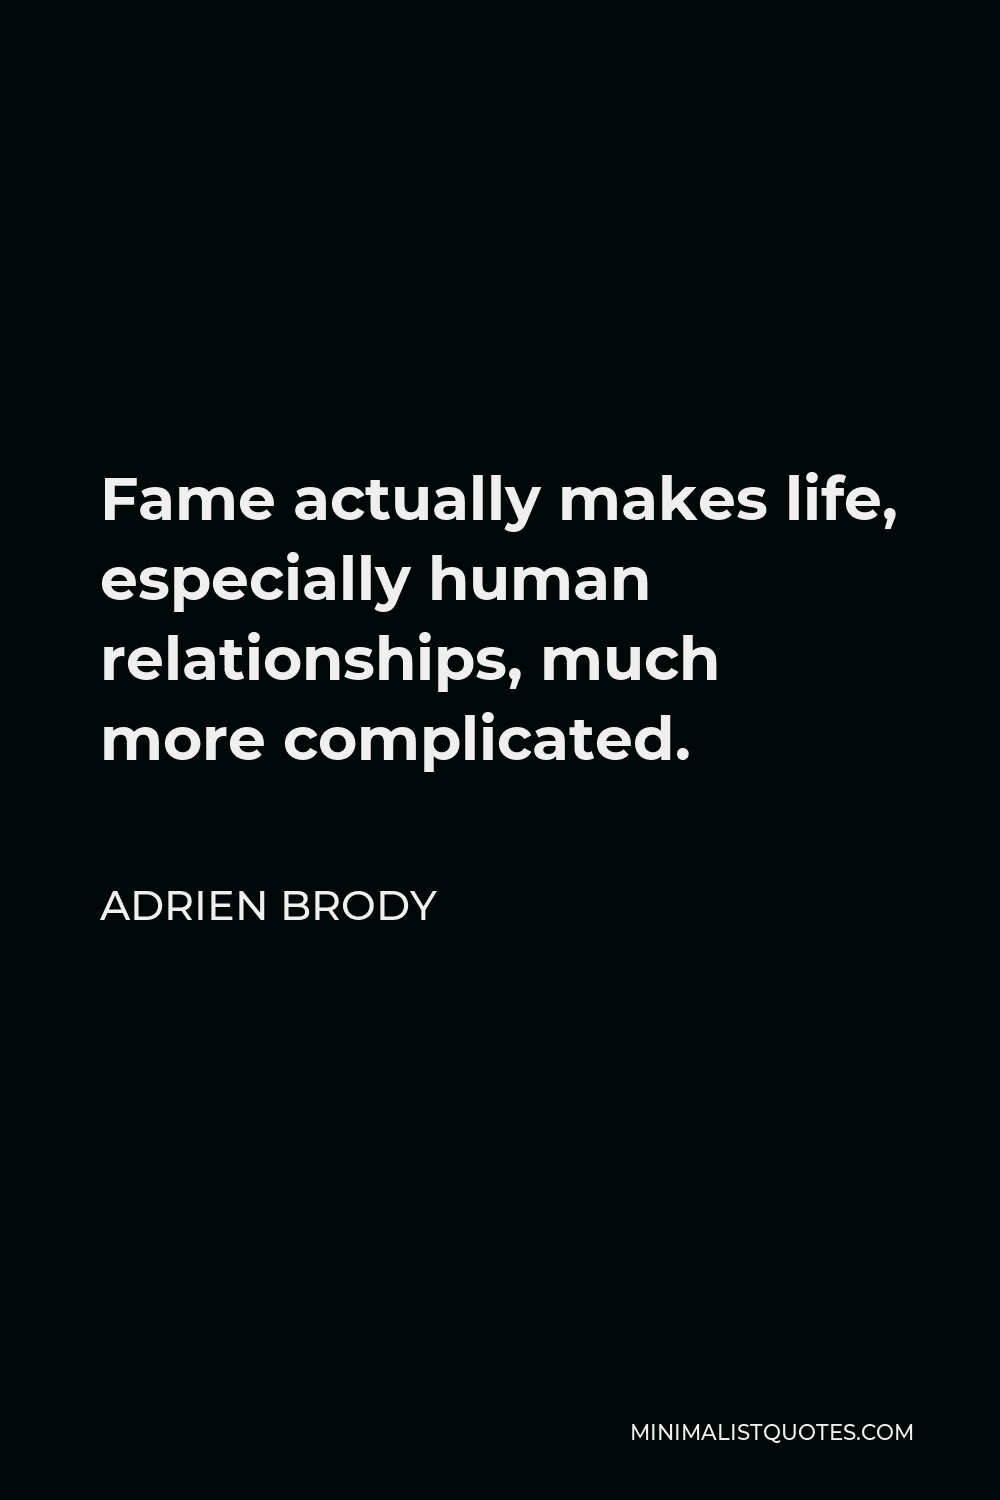 Adrien Brody Quote - Fame actually makes life, especially human relationships, much more complicated.